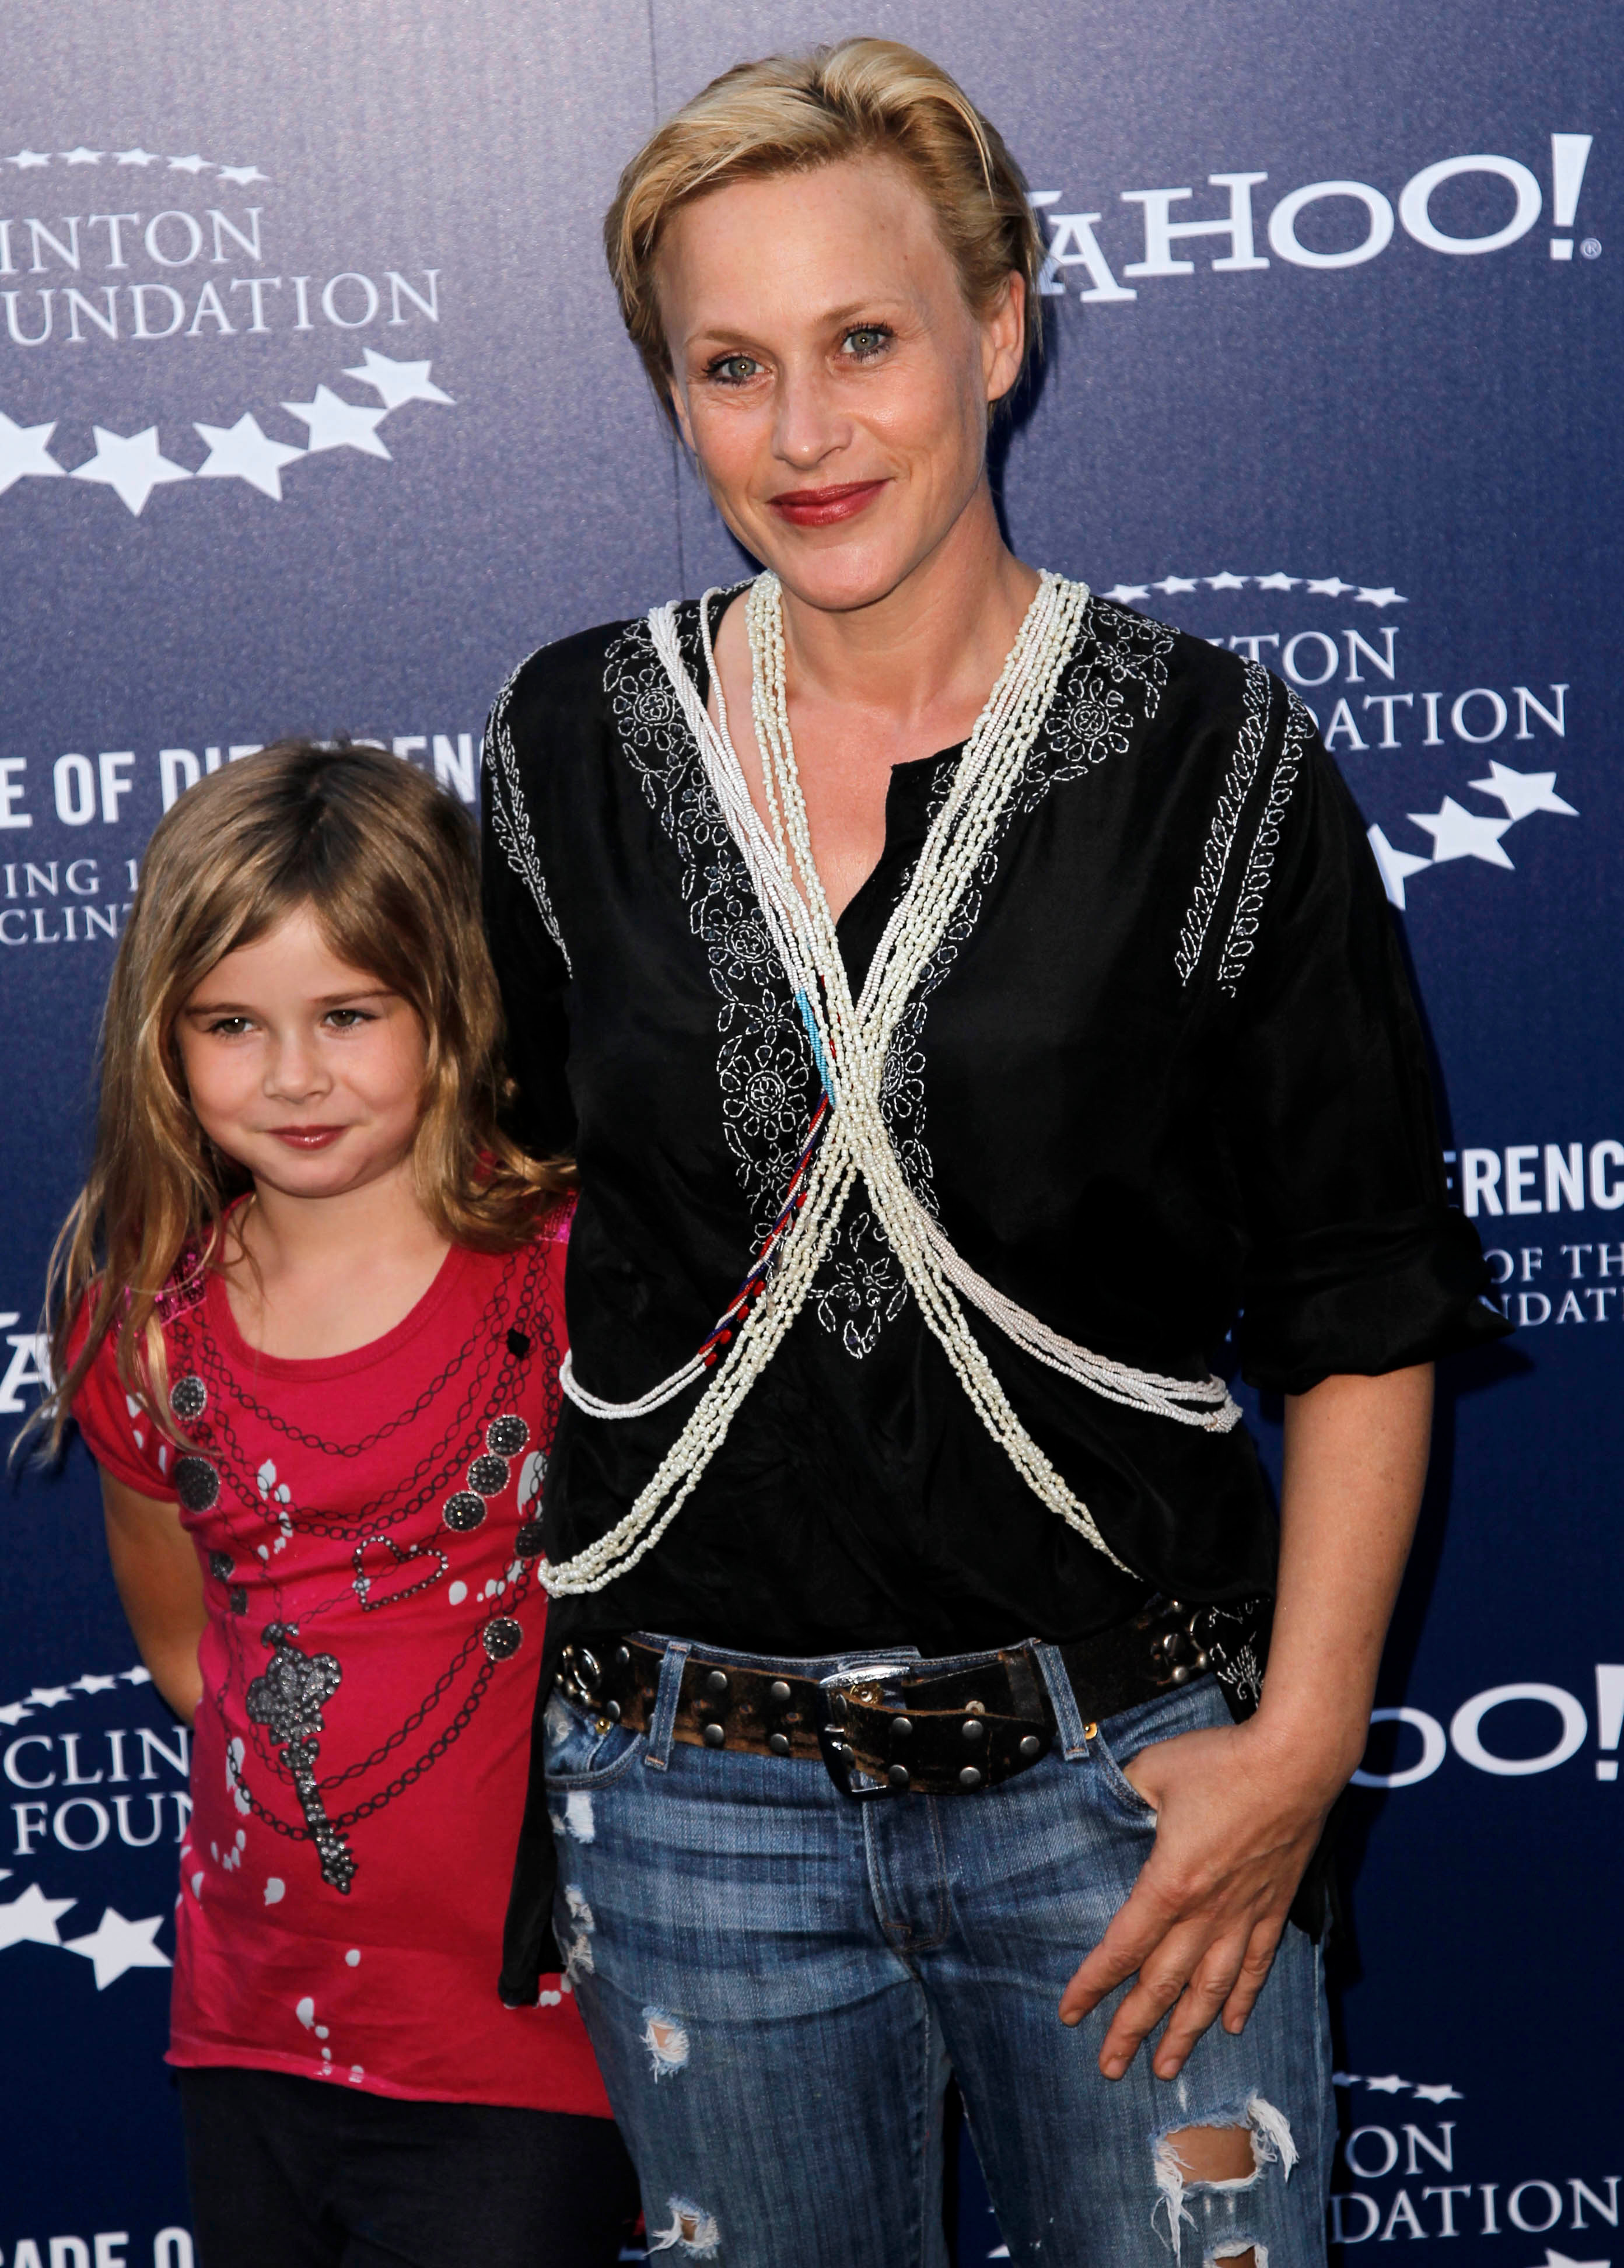 <p>Patricia Arquette brought then-8-year-old daughter Harlow Jane to the "A Decade of Difference" concert at the Hollywood Bowl in Los Angeles to celebrate 10 years of the William J. Clinton Foundation, on Oct. 15, 2011. The same year, Patricia's divorce from Harlow's dad, actor Thomas Jane, was finalized. </p>